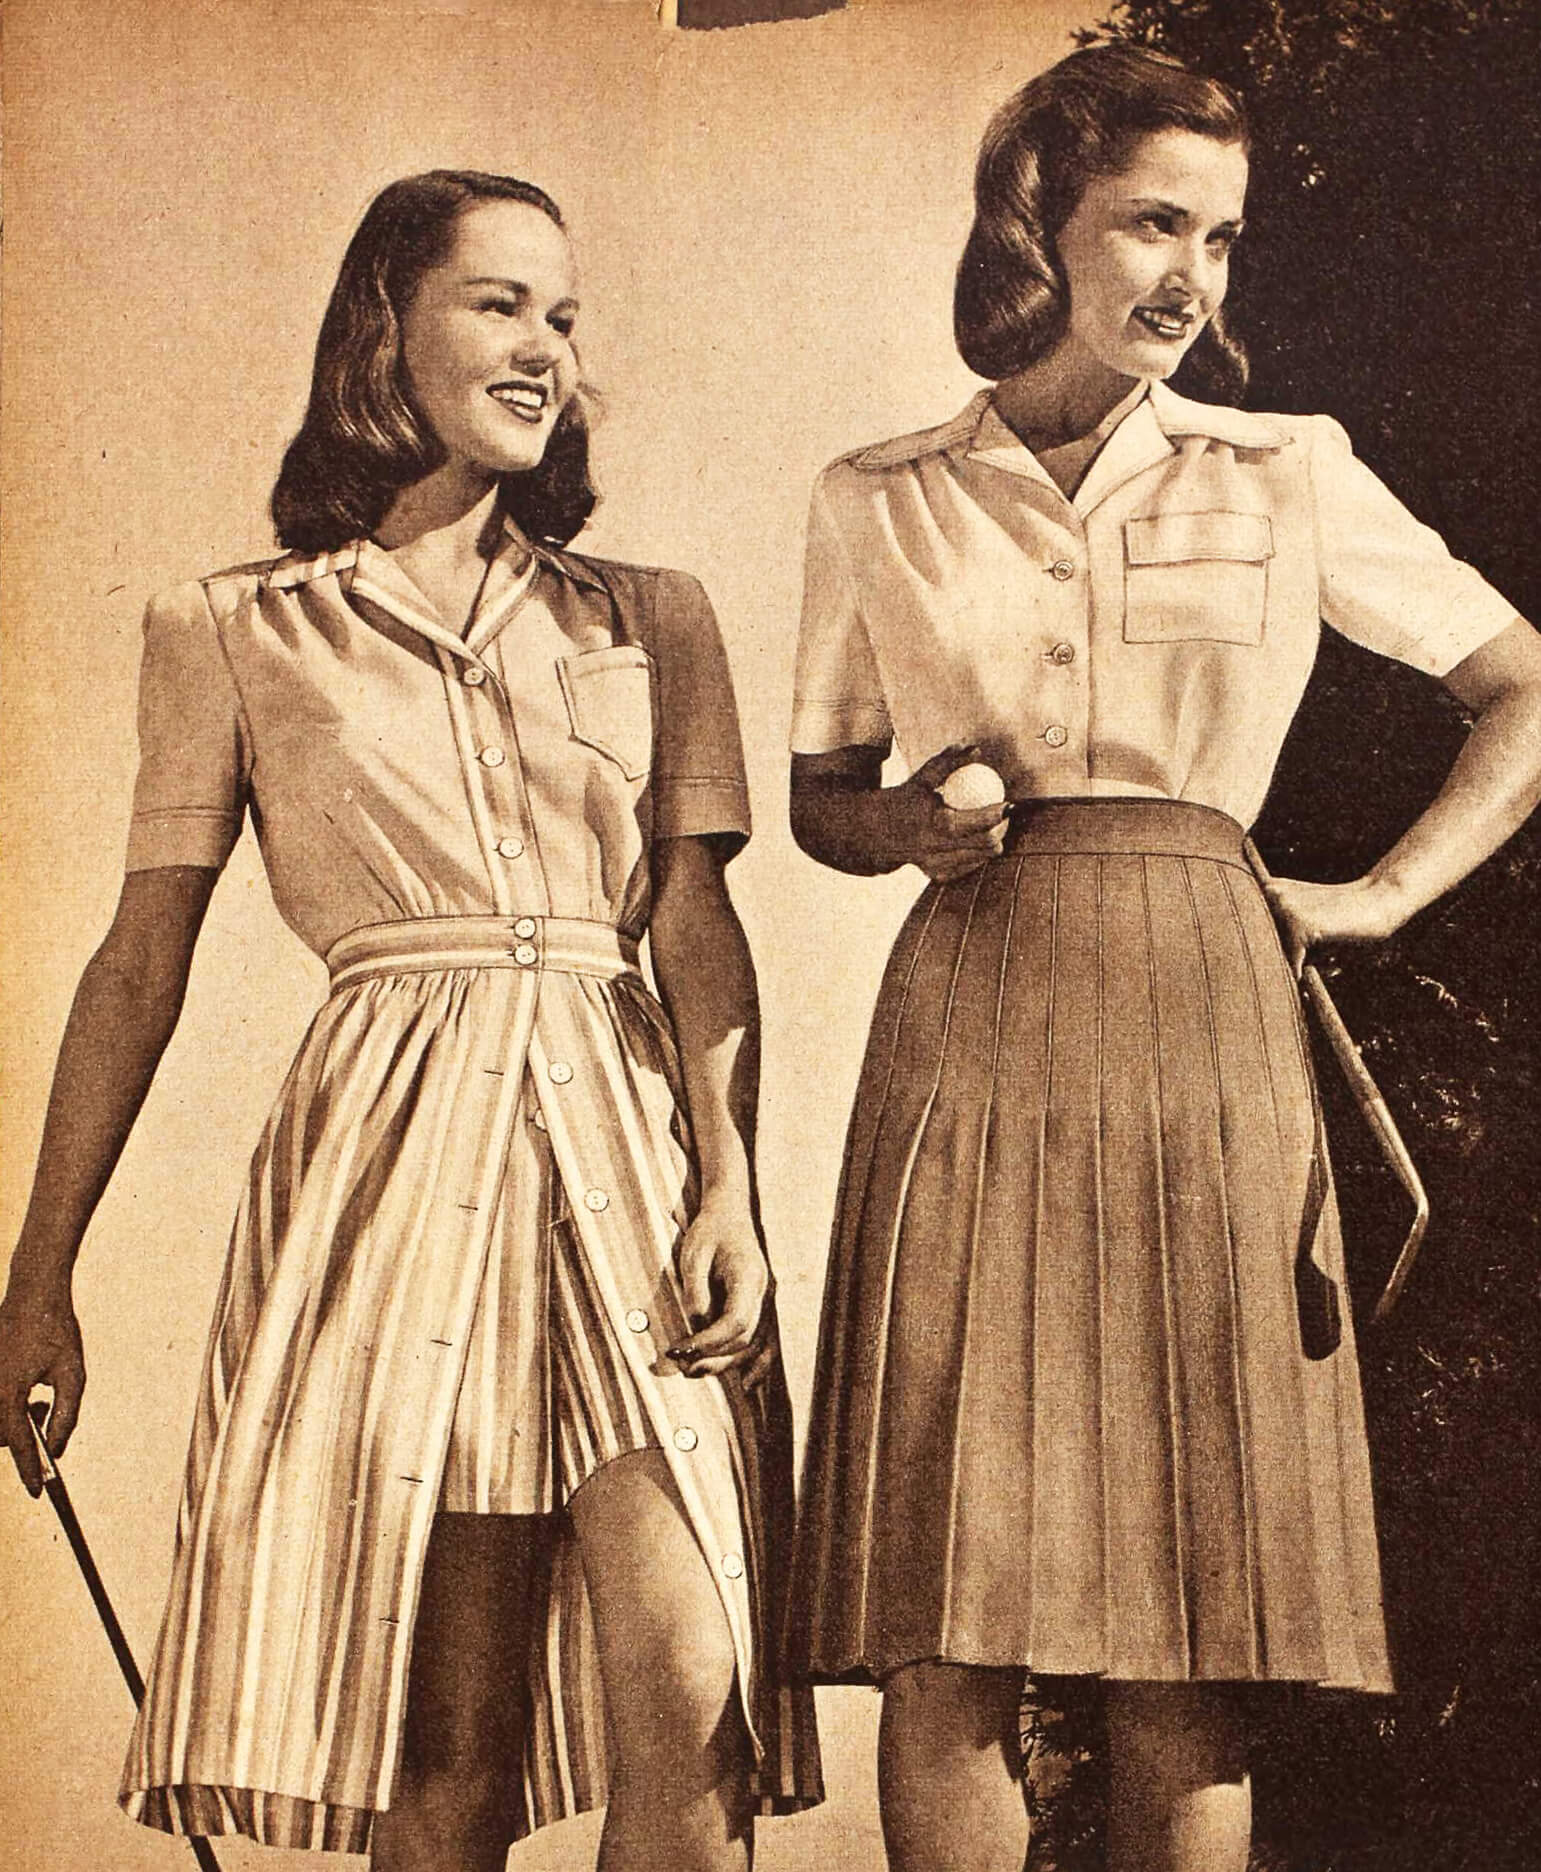 https://thevintagewomanmagazine.com/wp-content/uploads/2020/08/12-Outdoor-sports-clothes-Sears-Roebuck-Catalog-1945.jpg